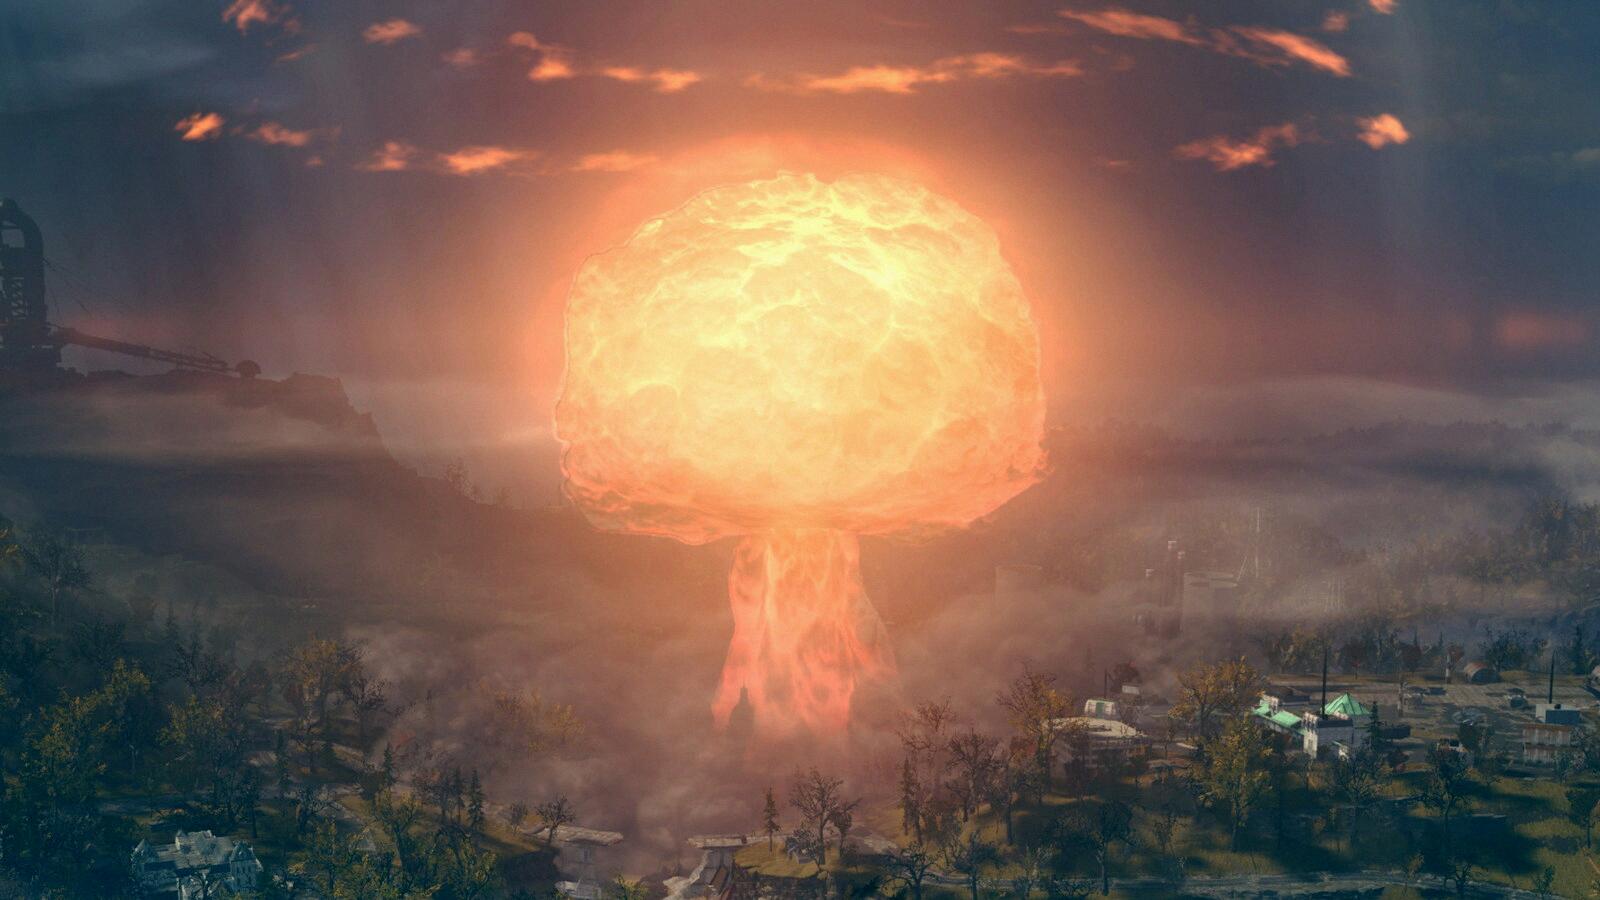 easiest way to launch a nuke fallout 76